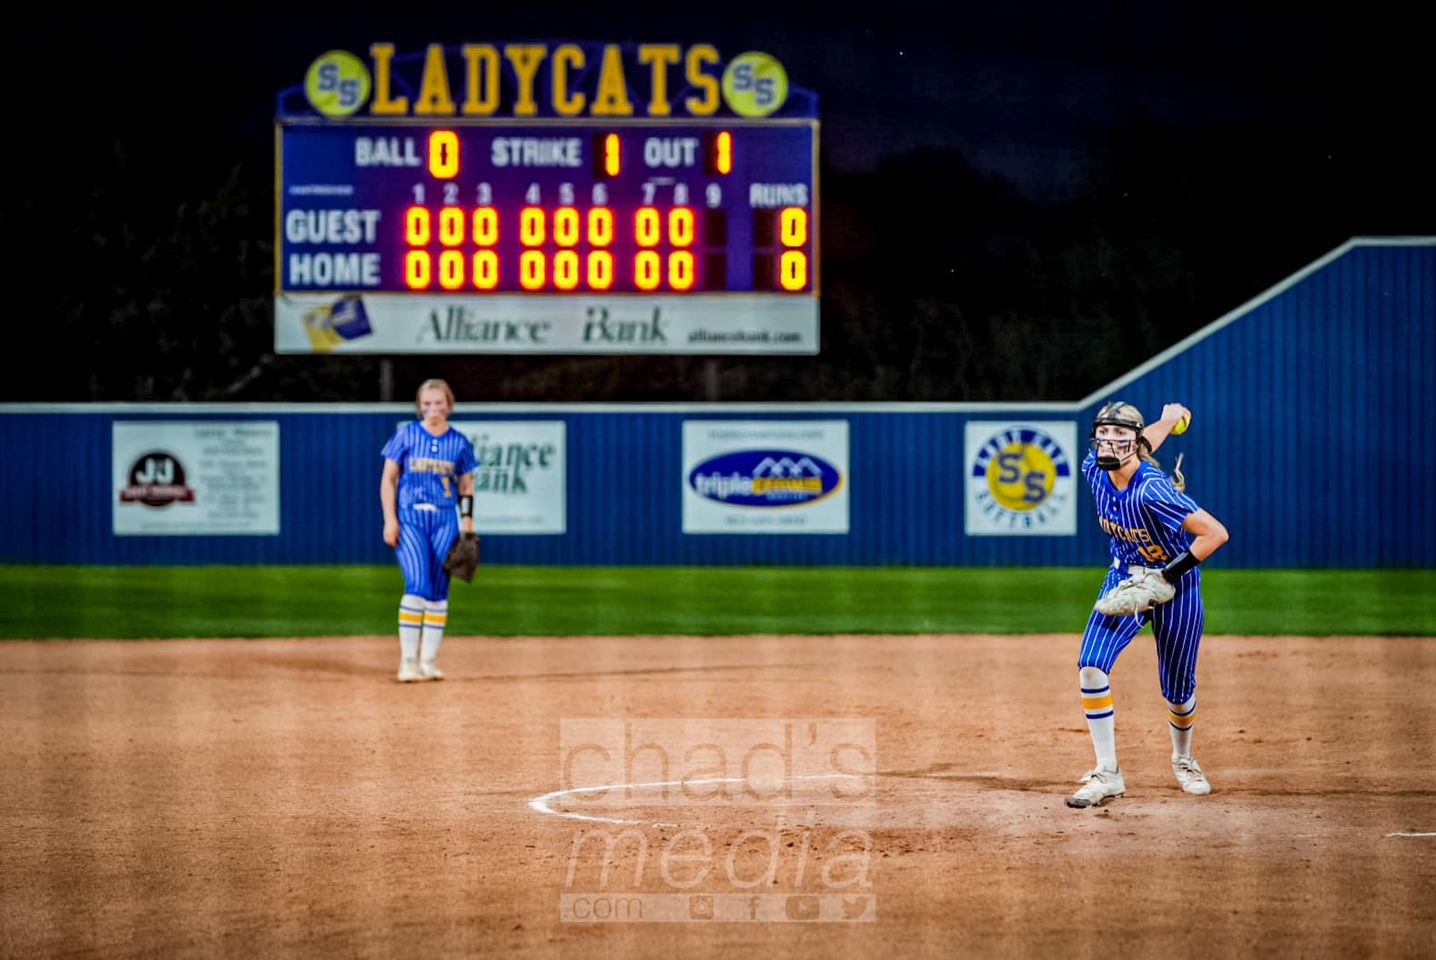 No. 8 Lady Cats win in 12th inning walk-off